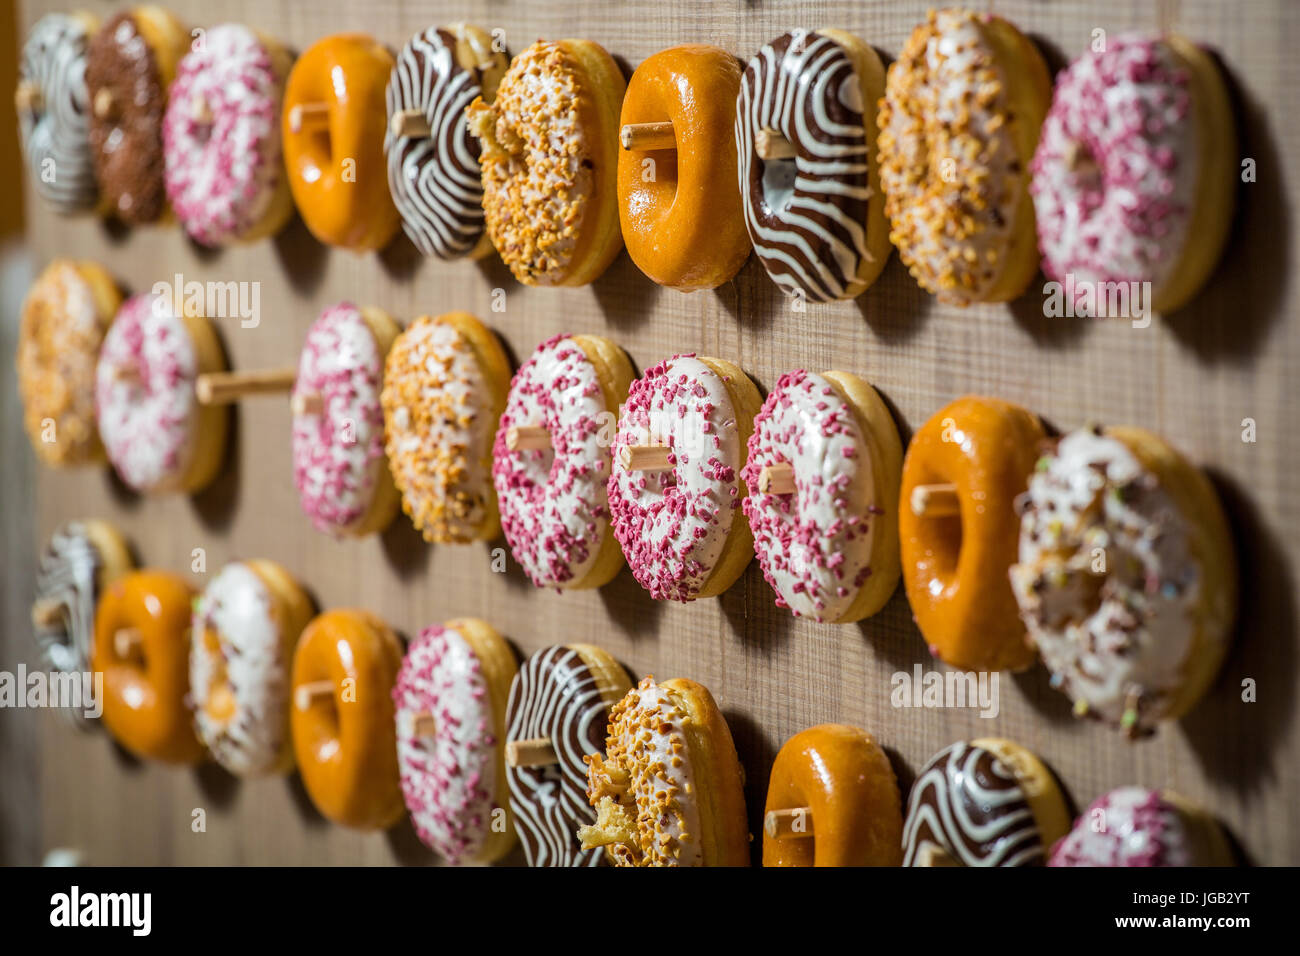 Delicious , colorful doughnuts in a row Stock Photo